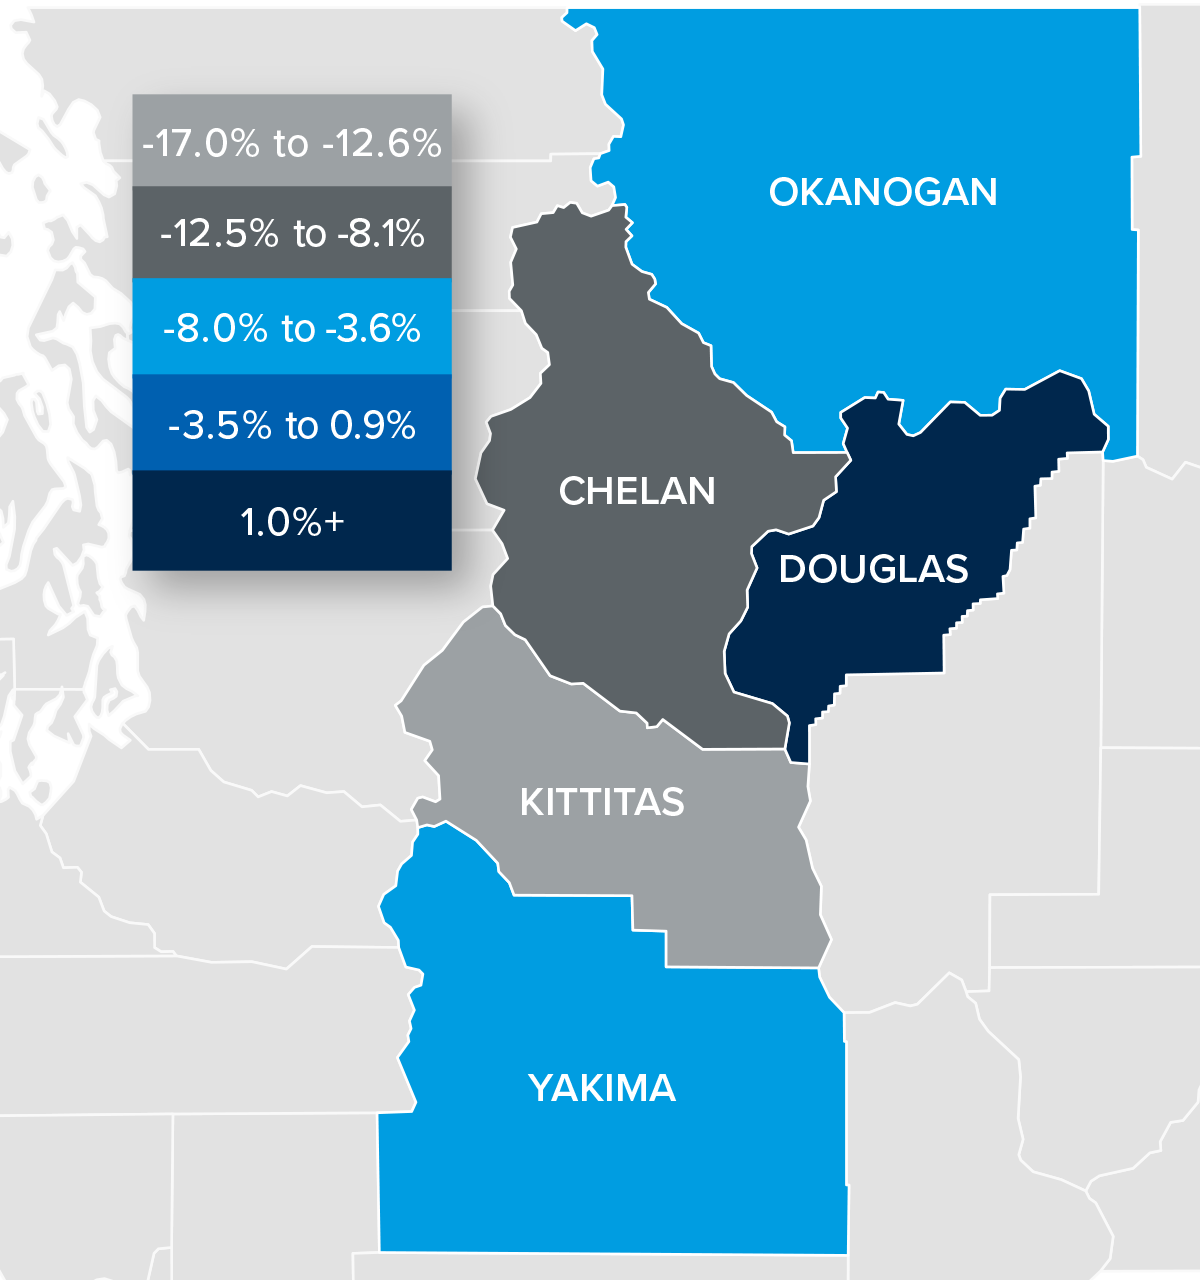 A map showing the real estate home prices percentage changes for various counties in Central Washington. Different colors correspond to different tiers of percentage change. Kittitas County had a percentage change in the -17% to -12.6% range. Chelan was in the -12.5% to -8.1% change range. Yakima and Okanogan Counties are in the -8% to -3.6% change range. Douglas is in the 1%+ change range.